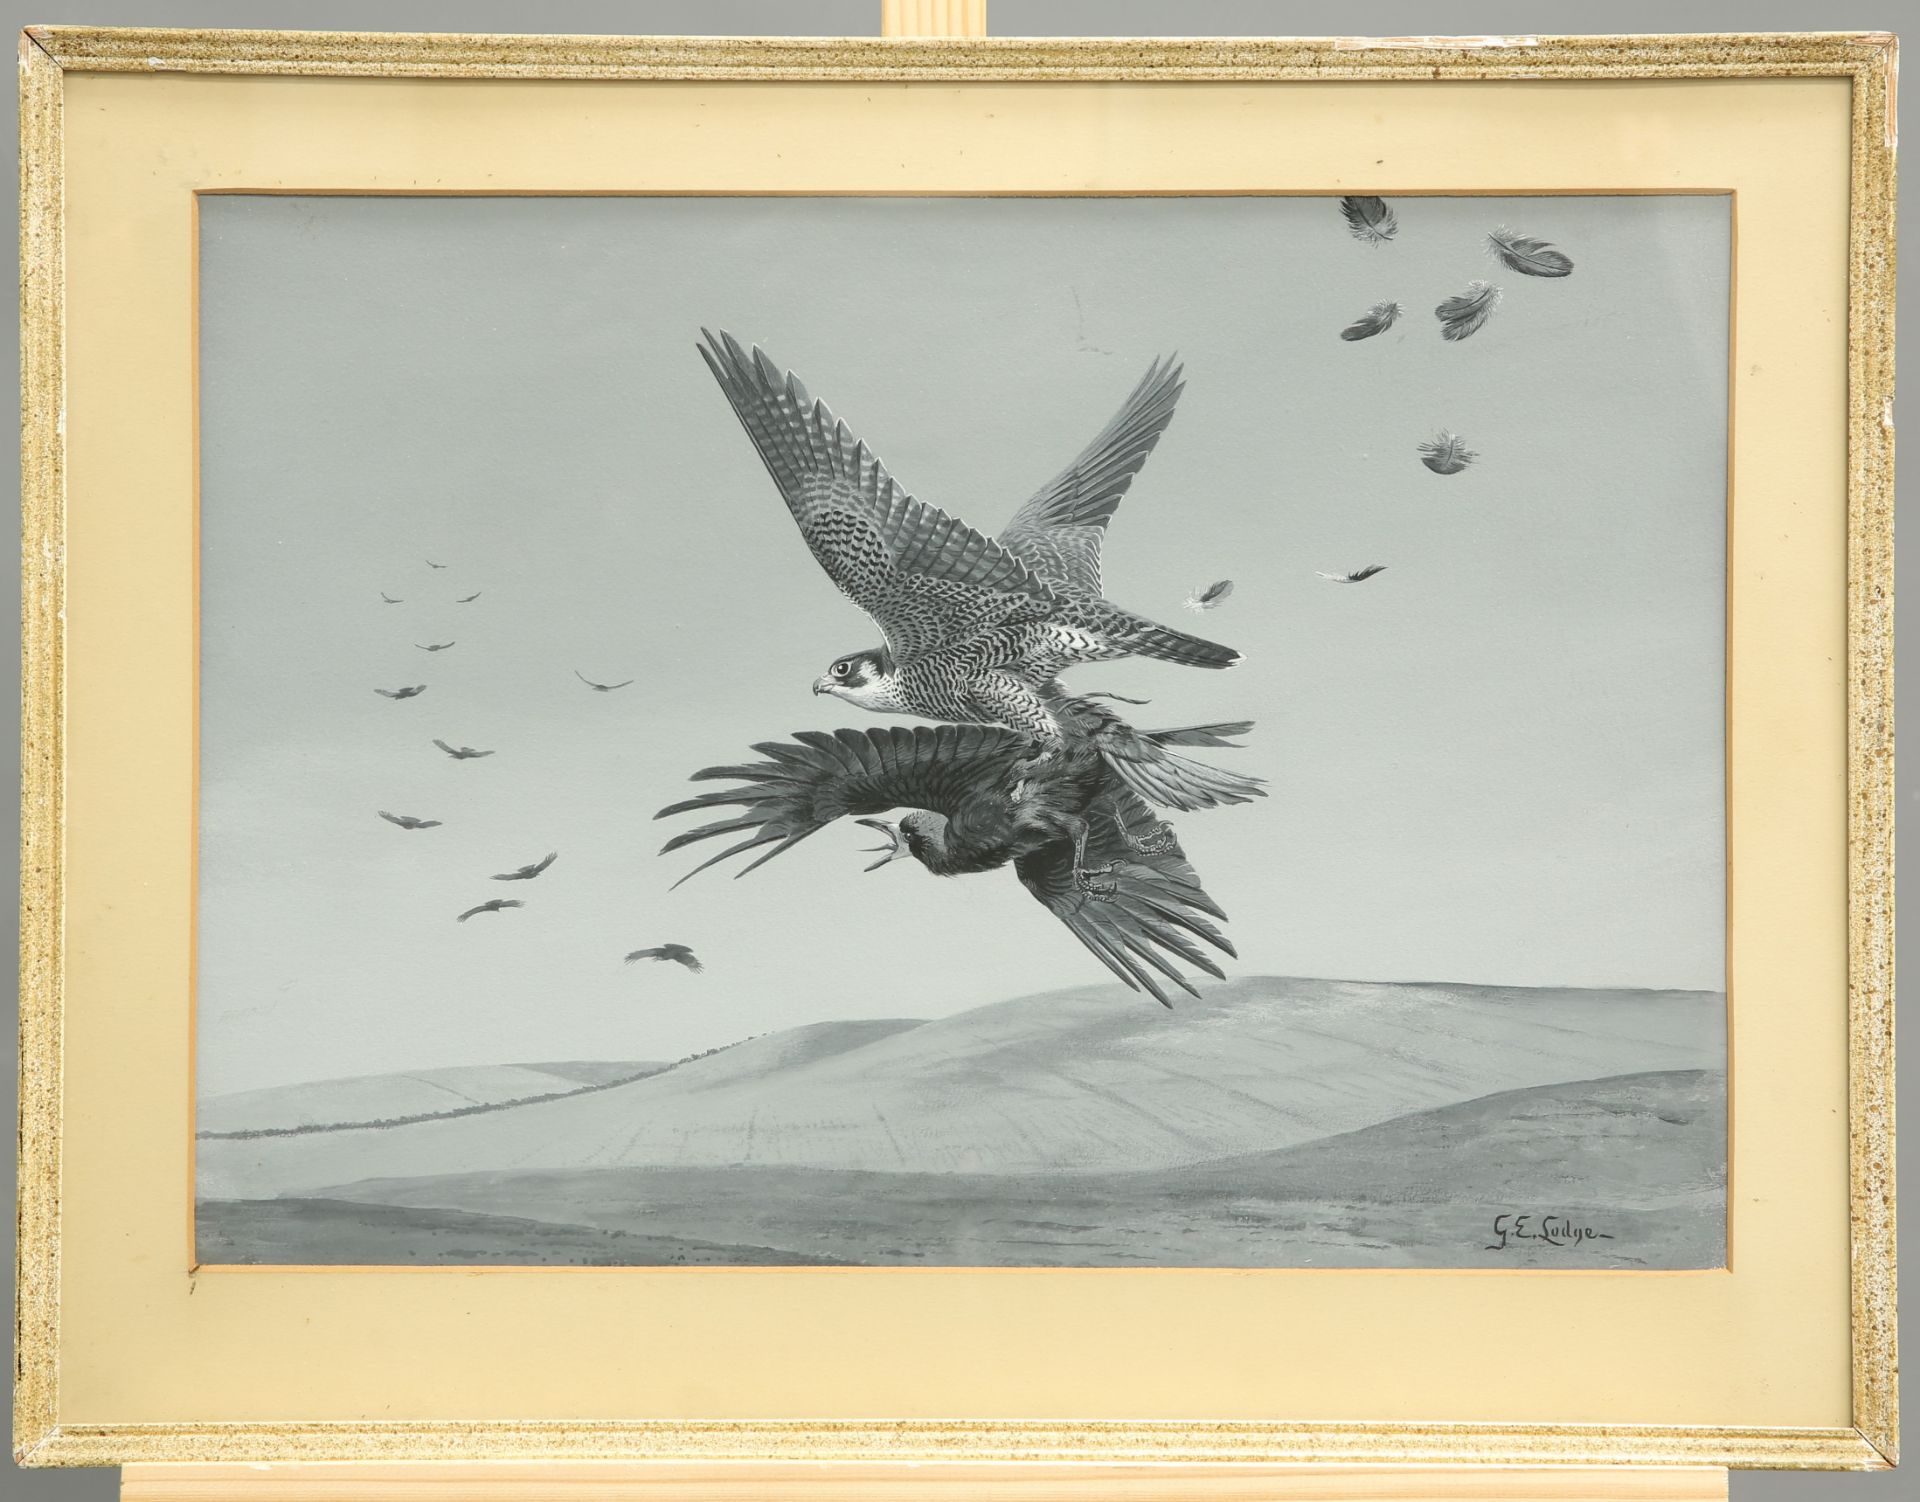 GEORGE EDWARD LODGE (1860-1954), PEREGRINE FALCON CAPTURING A ROOK IN FLIGHT